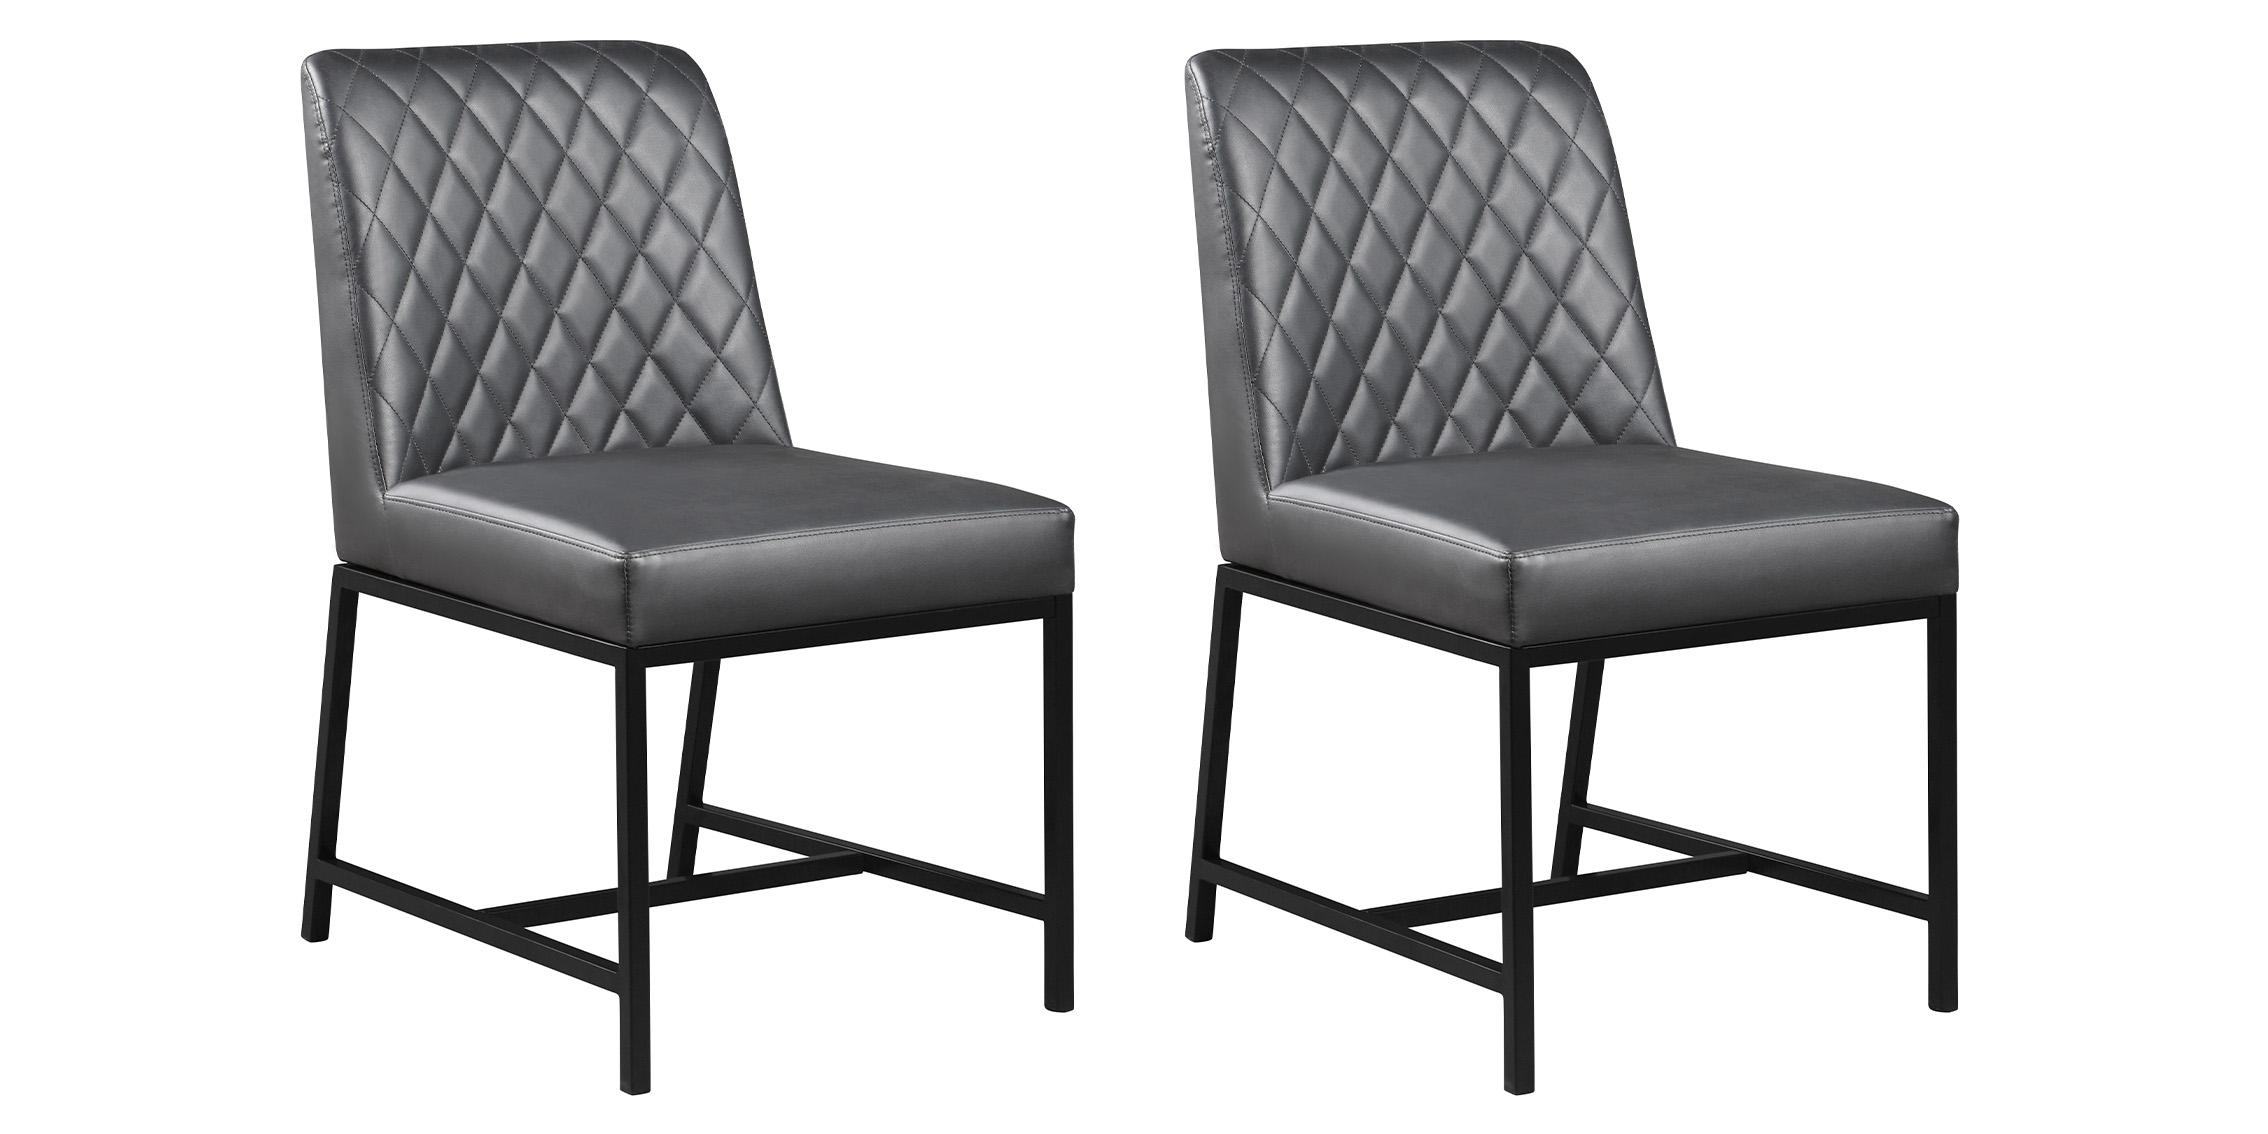 Contemporary, Modern Dining Chair Set BRYCE 918Grey-C 918Grey-C-Set-2 in Gray Faux Leather